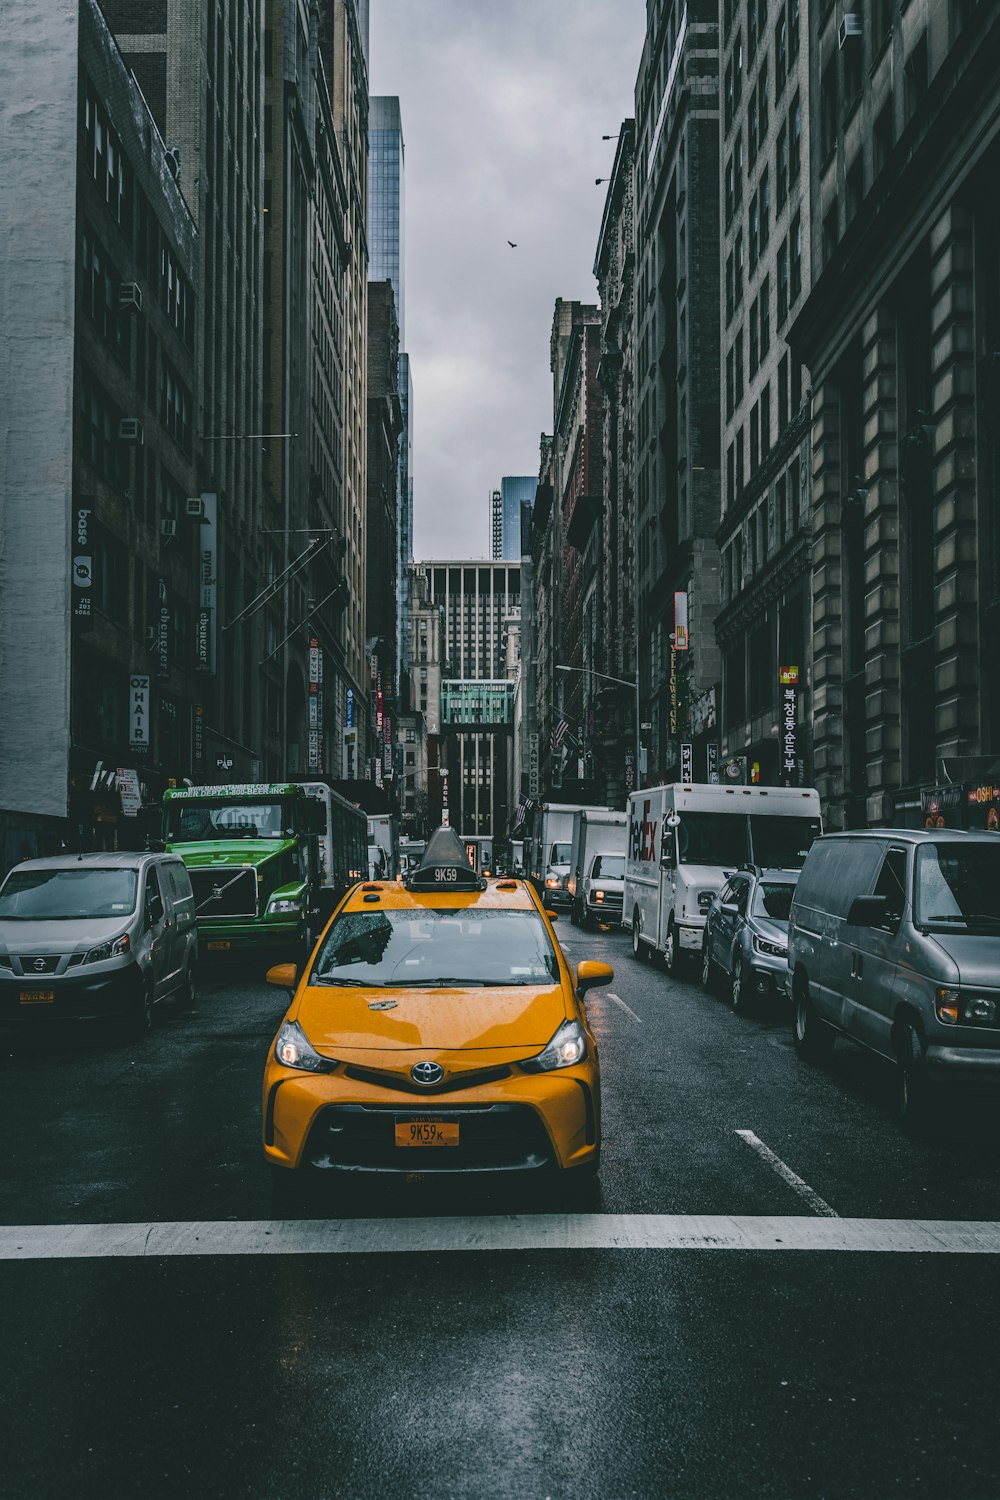 selective color photo of yellow cab